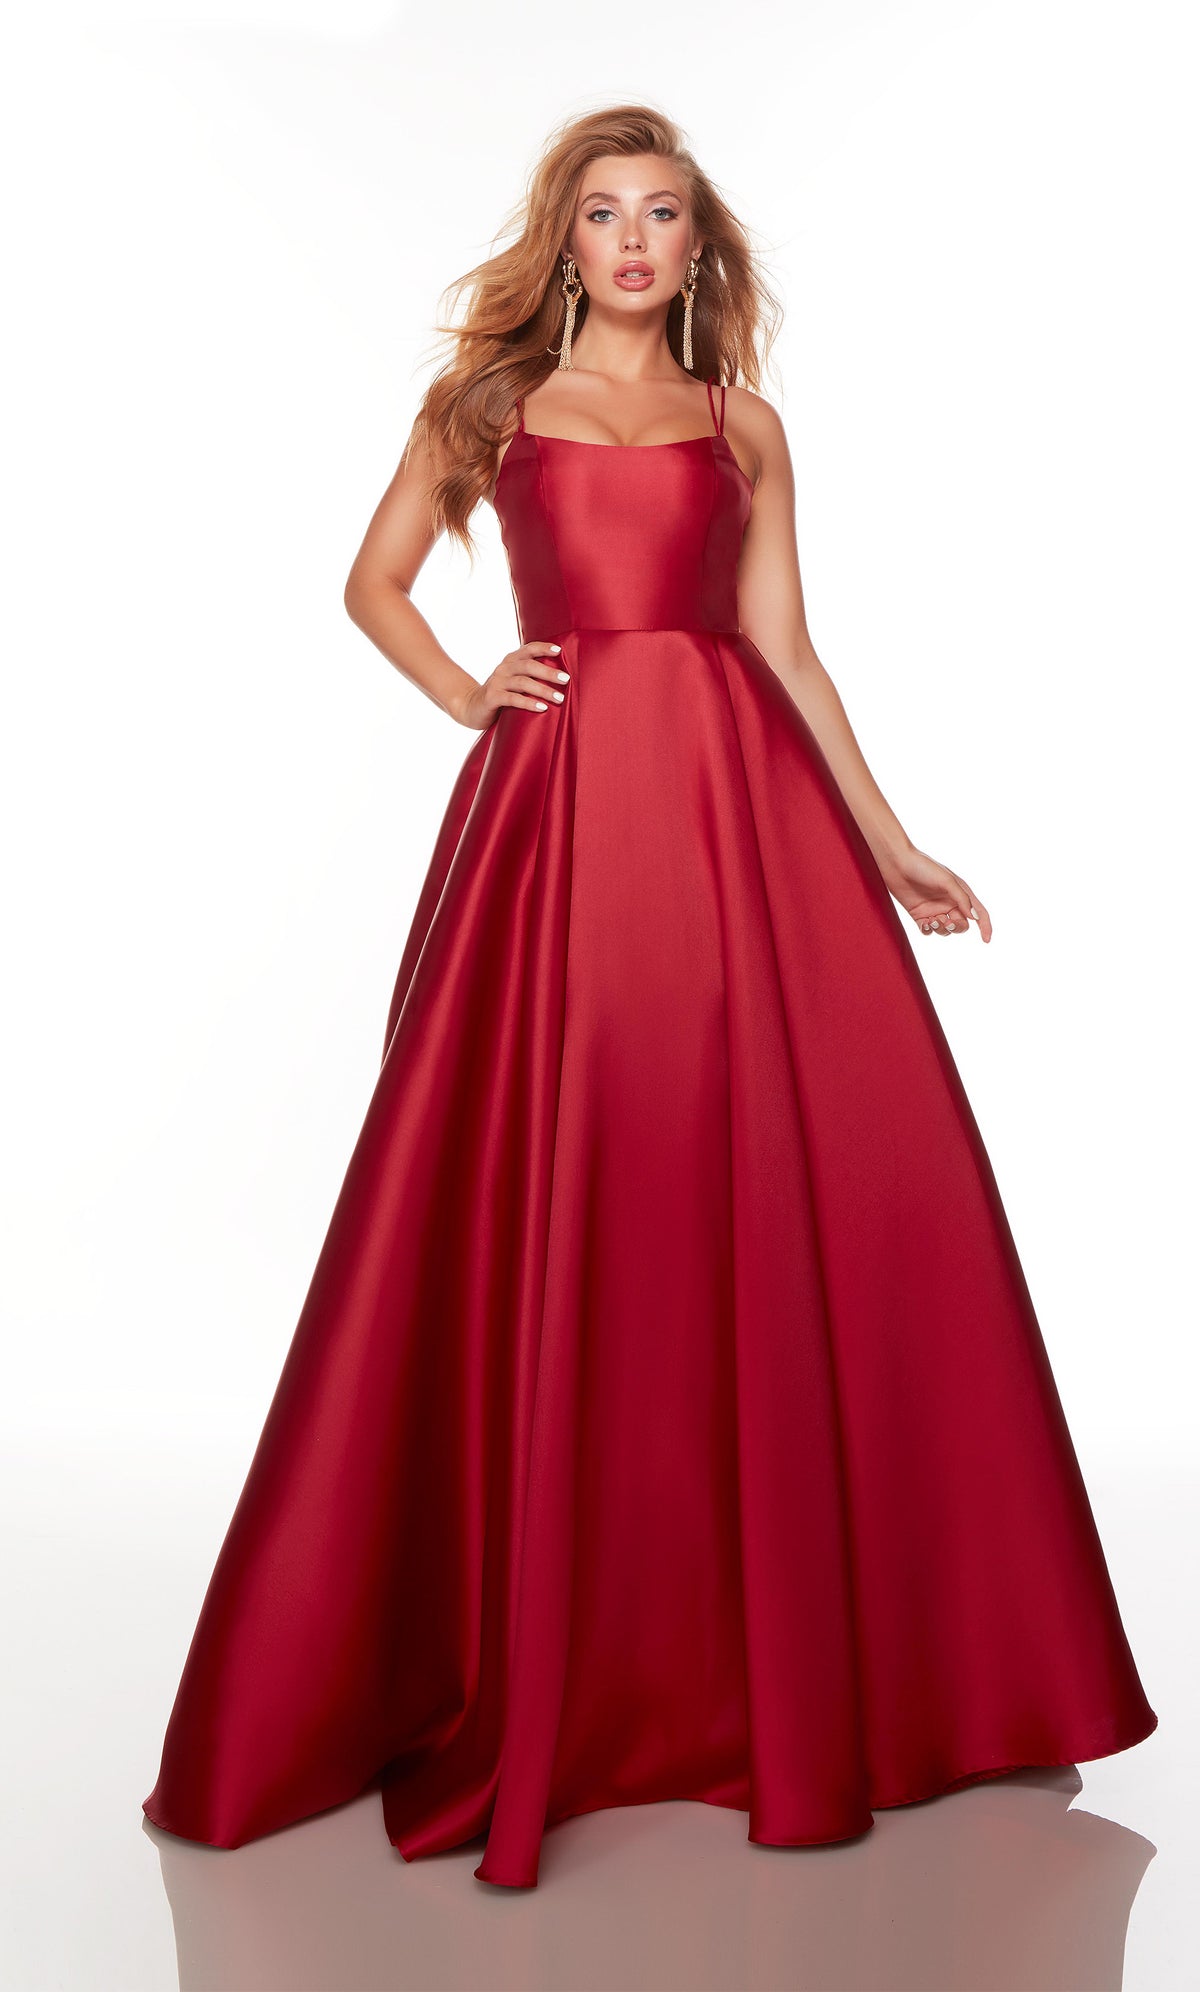 Scoop neck, wine red prom dress with a pleated skirt. COLOR-SWATCH_1751__WINE